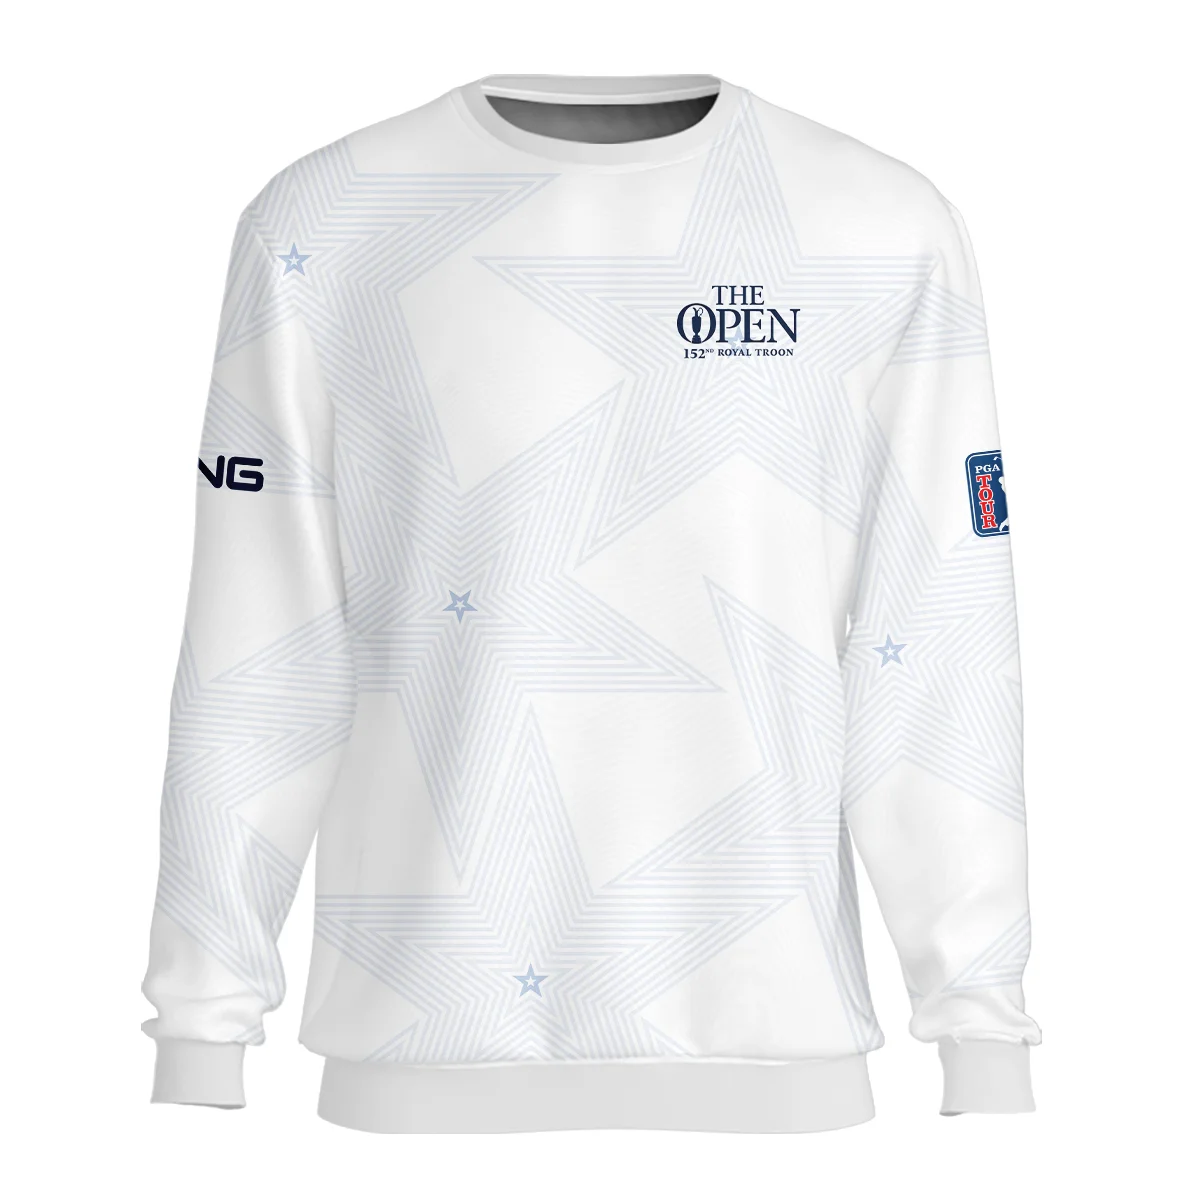 152nd The Open Championship Golf Ping Hoodie Shirt Stars White Navy Golf Sports All Over Print Hoodie Shirt